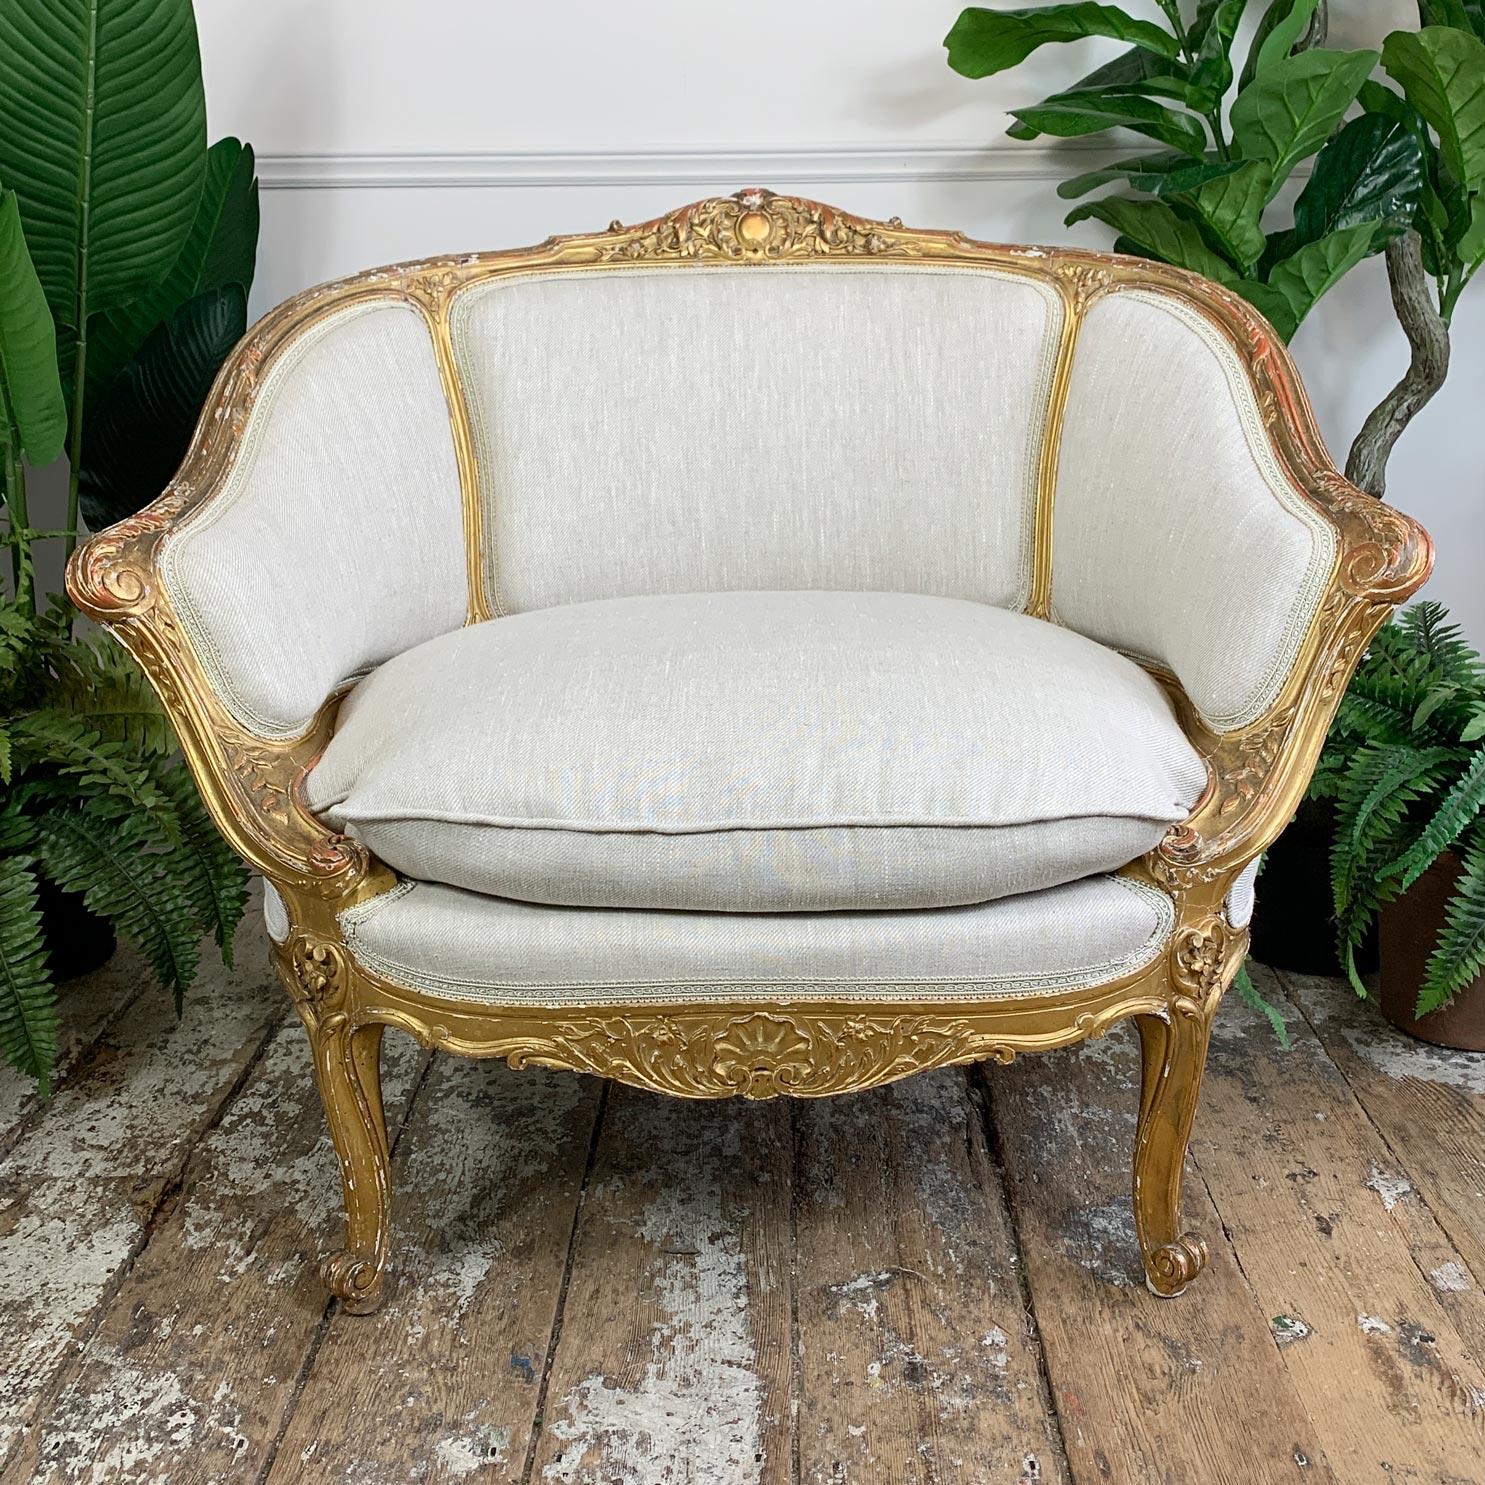 This rare and beautiful French Louis XV style fauteuil marquise chair, which is often referred to as ‘The Queens’ chair, is of carved giltwood construction and has been recently fully professionally reupholstered in a luxurious oatmeal linen. The